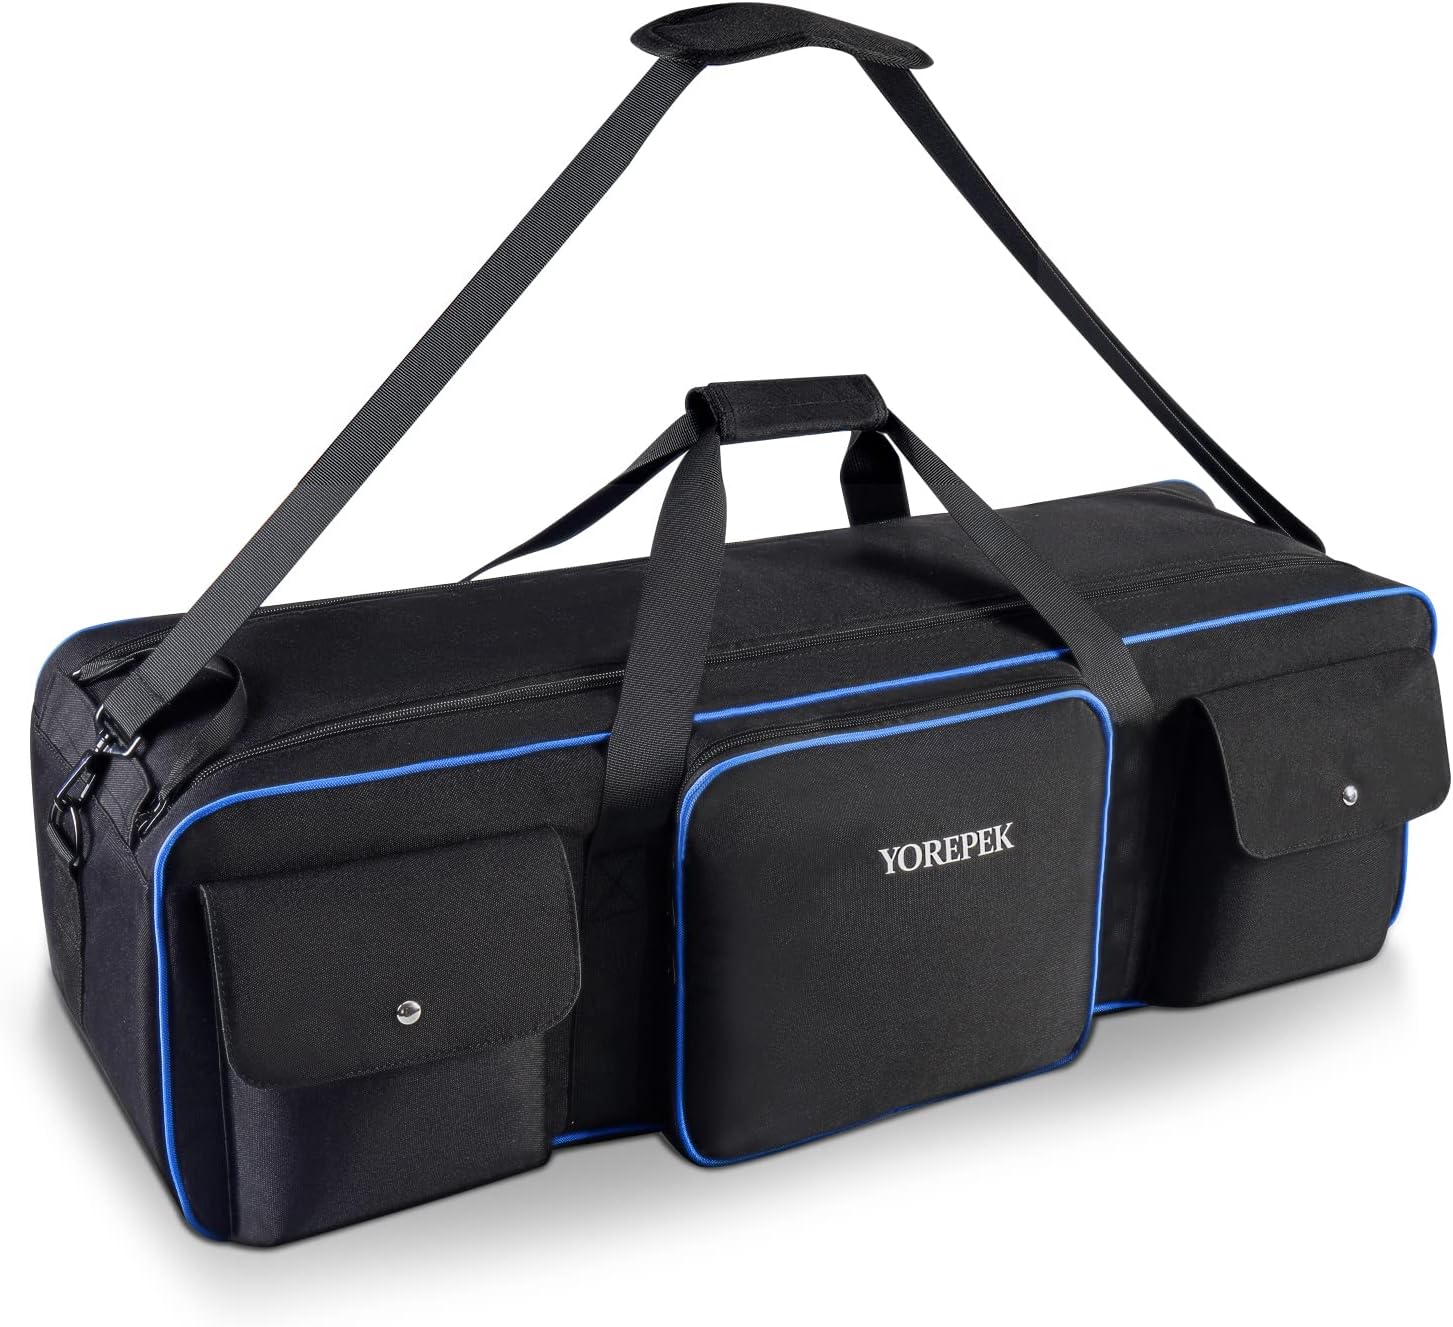 Tripod Carrying Cases